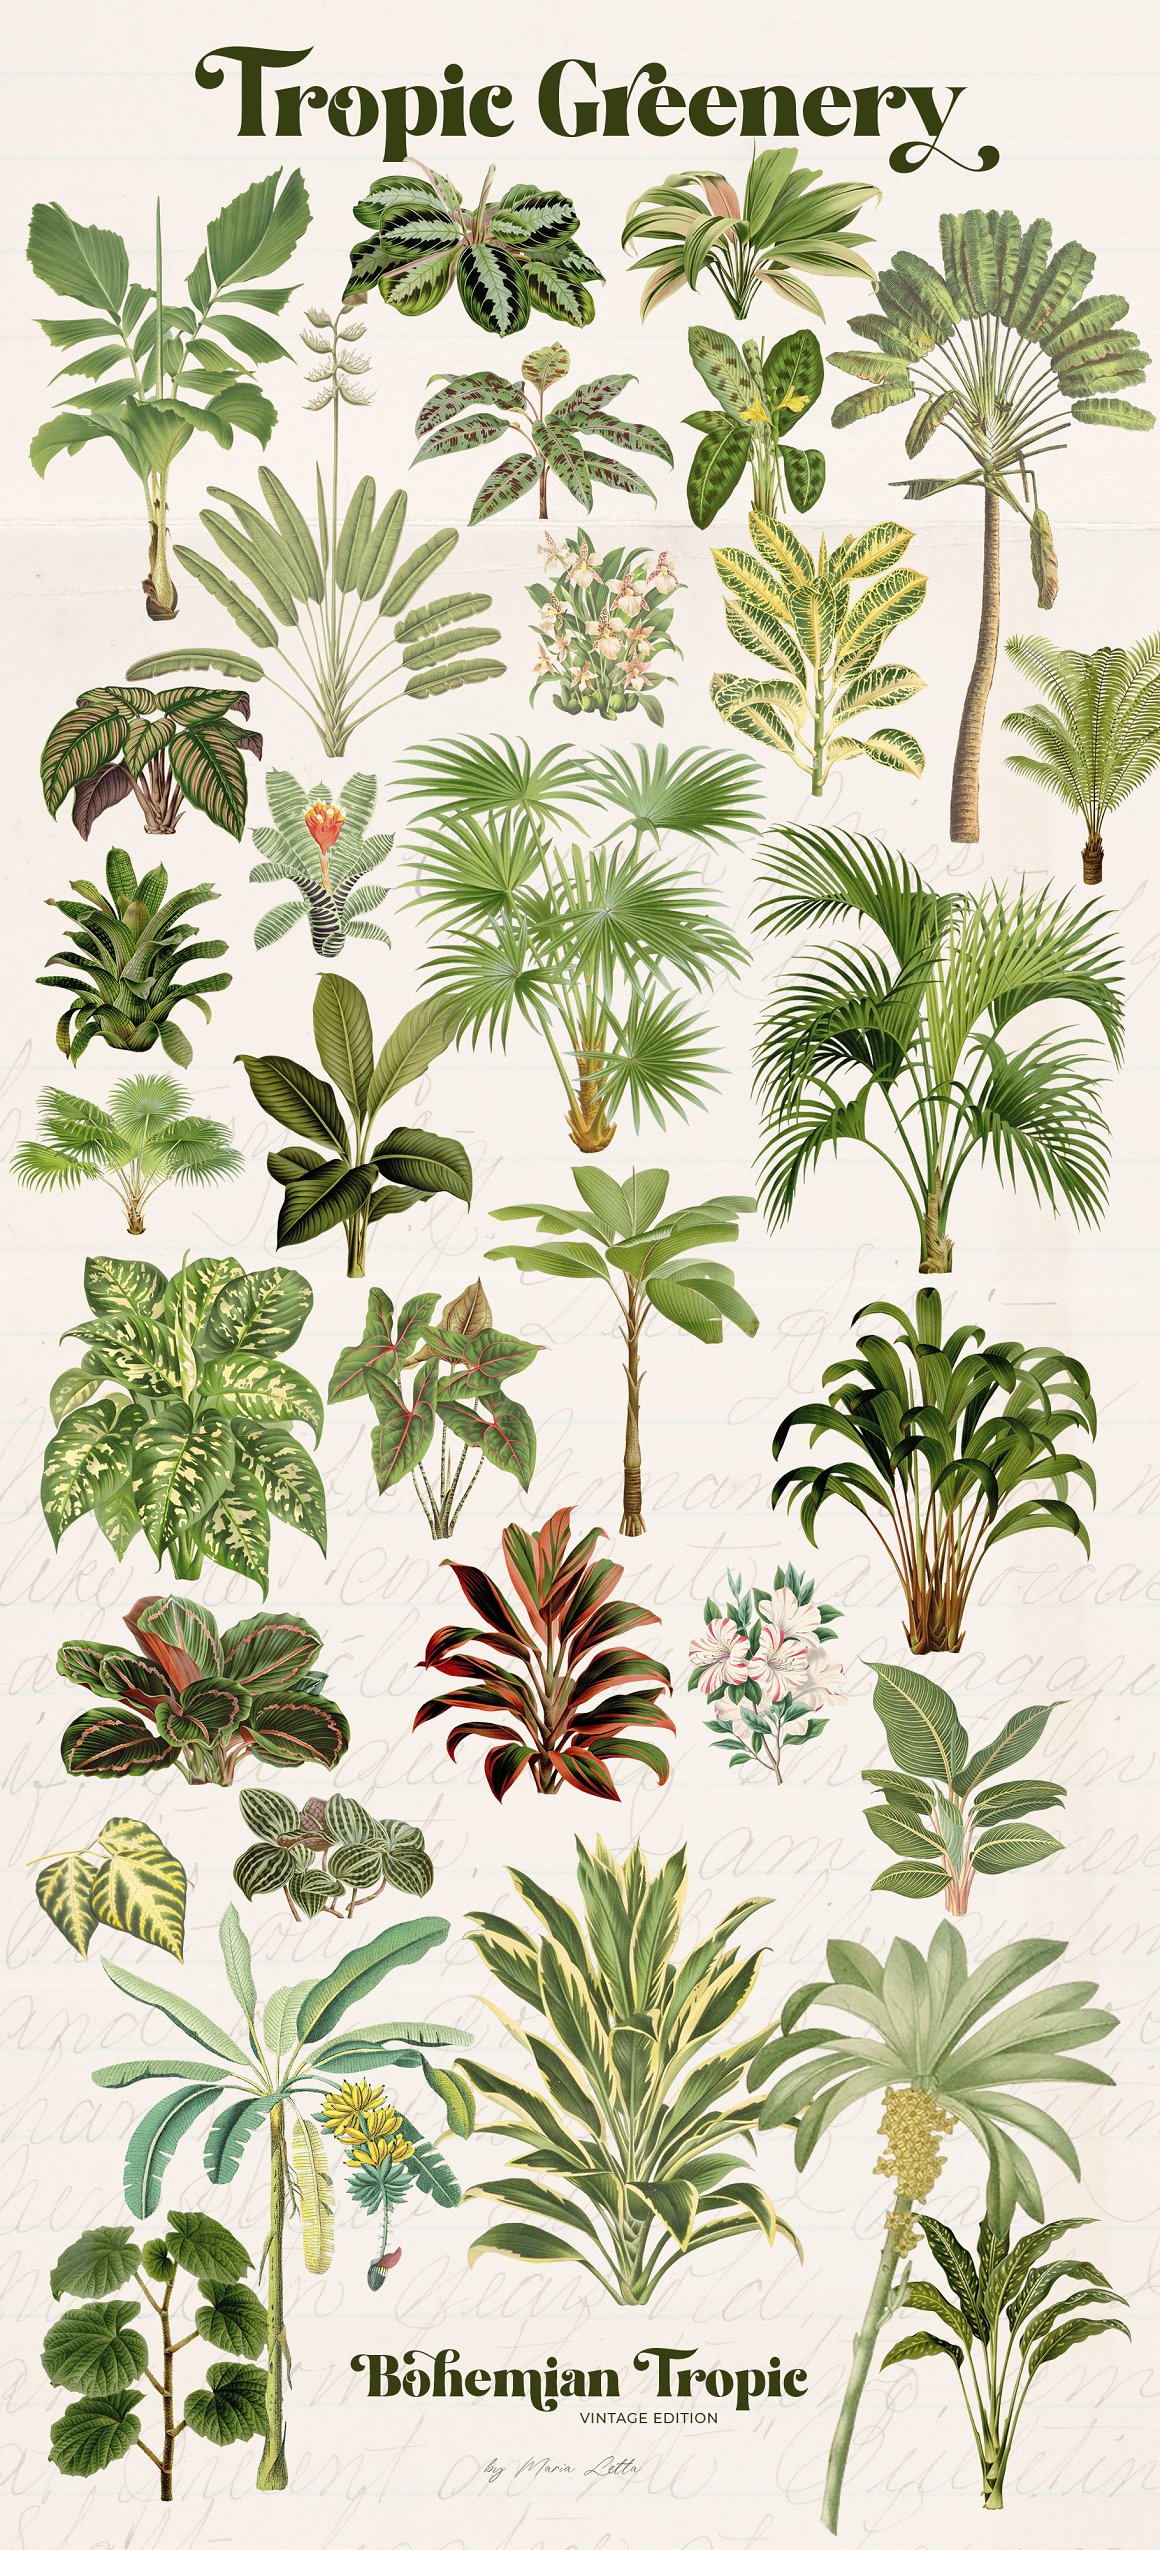 Leaves and vegetable and others.